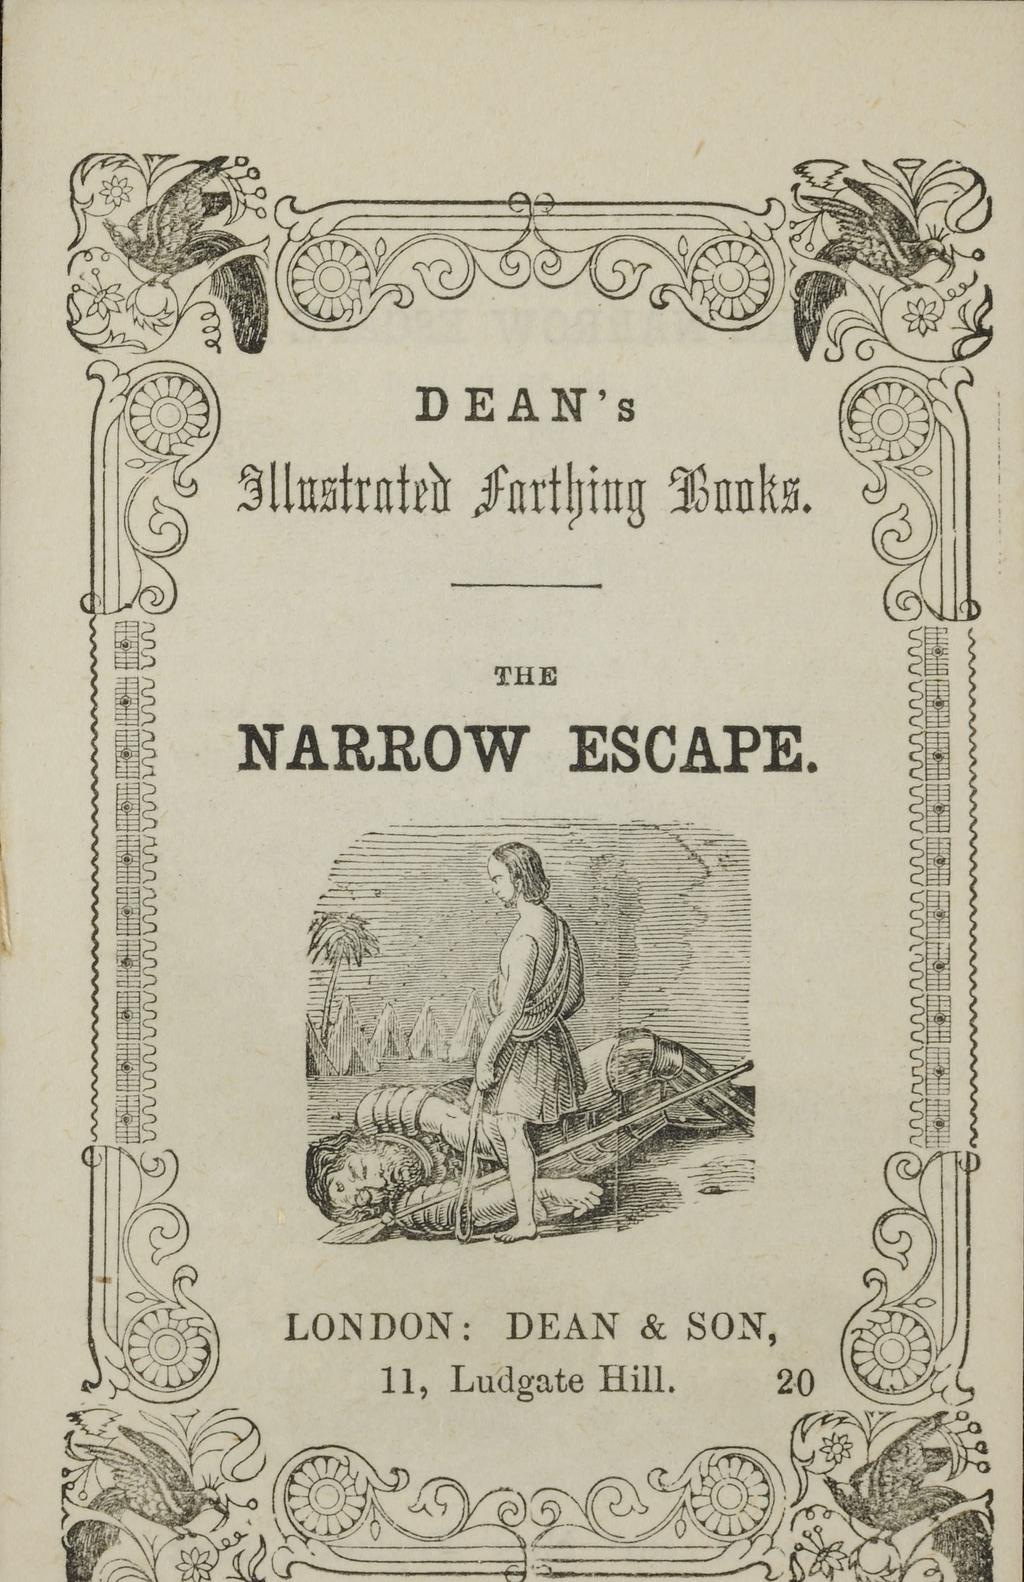 DEAN S Illustrated Farthing Books.